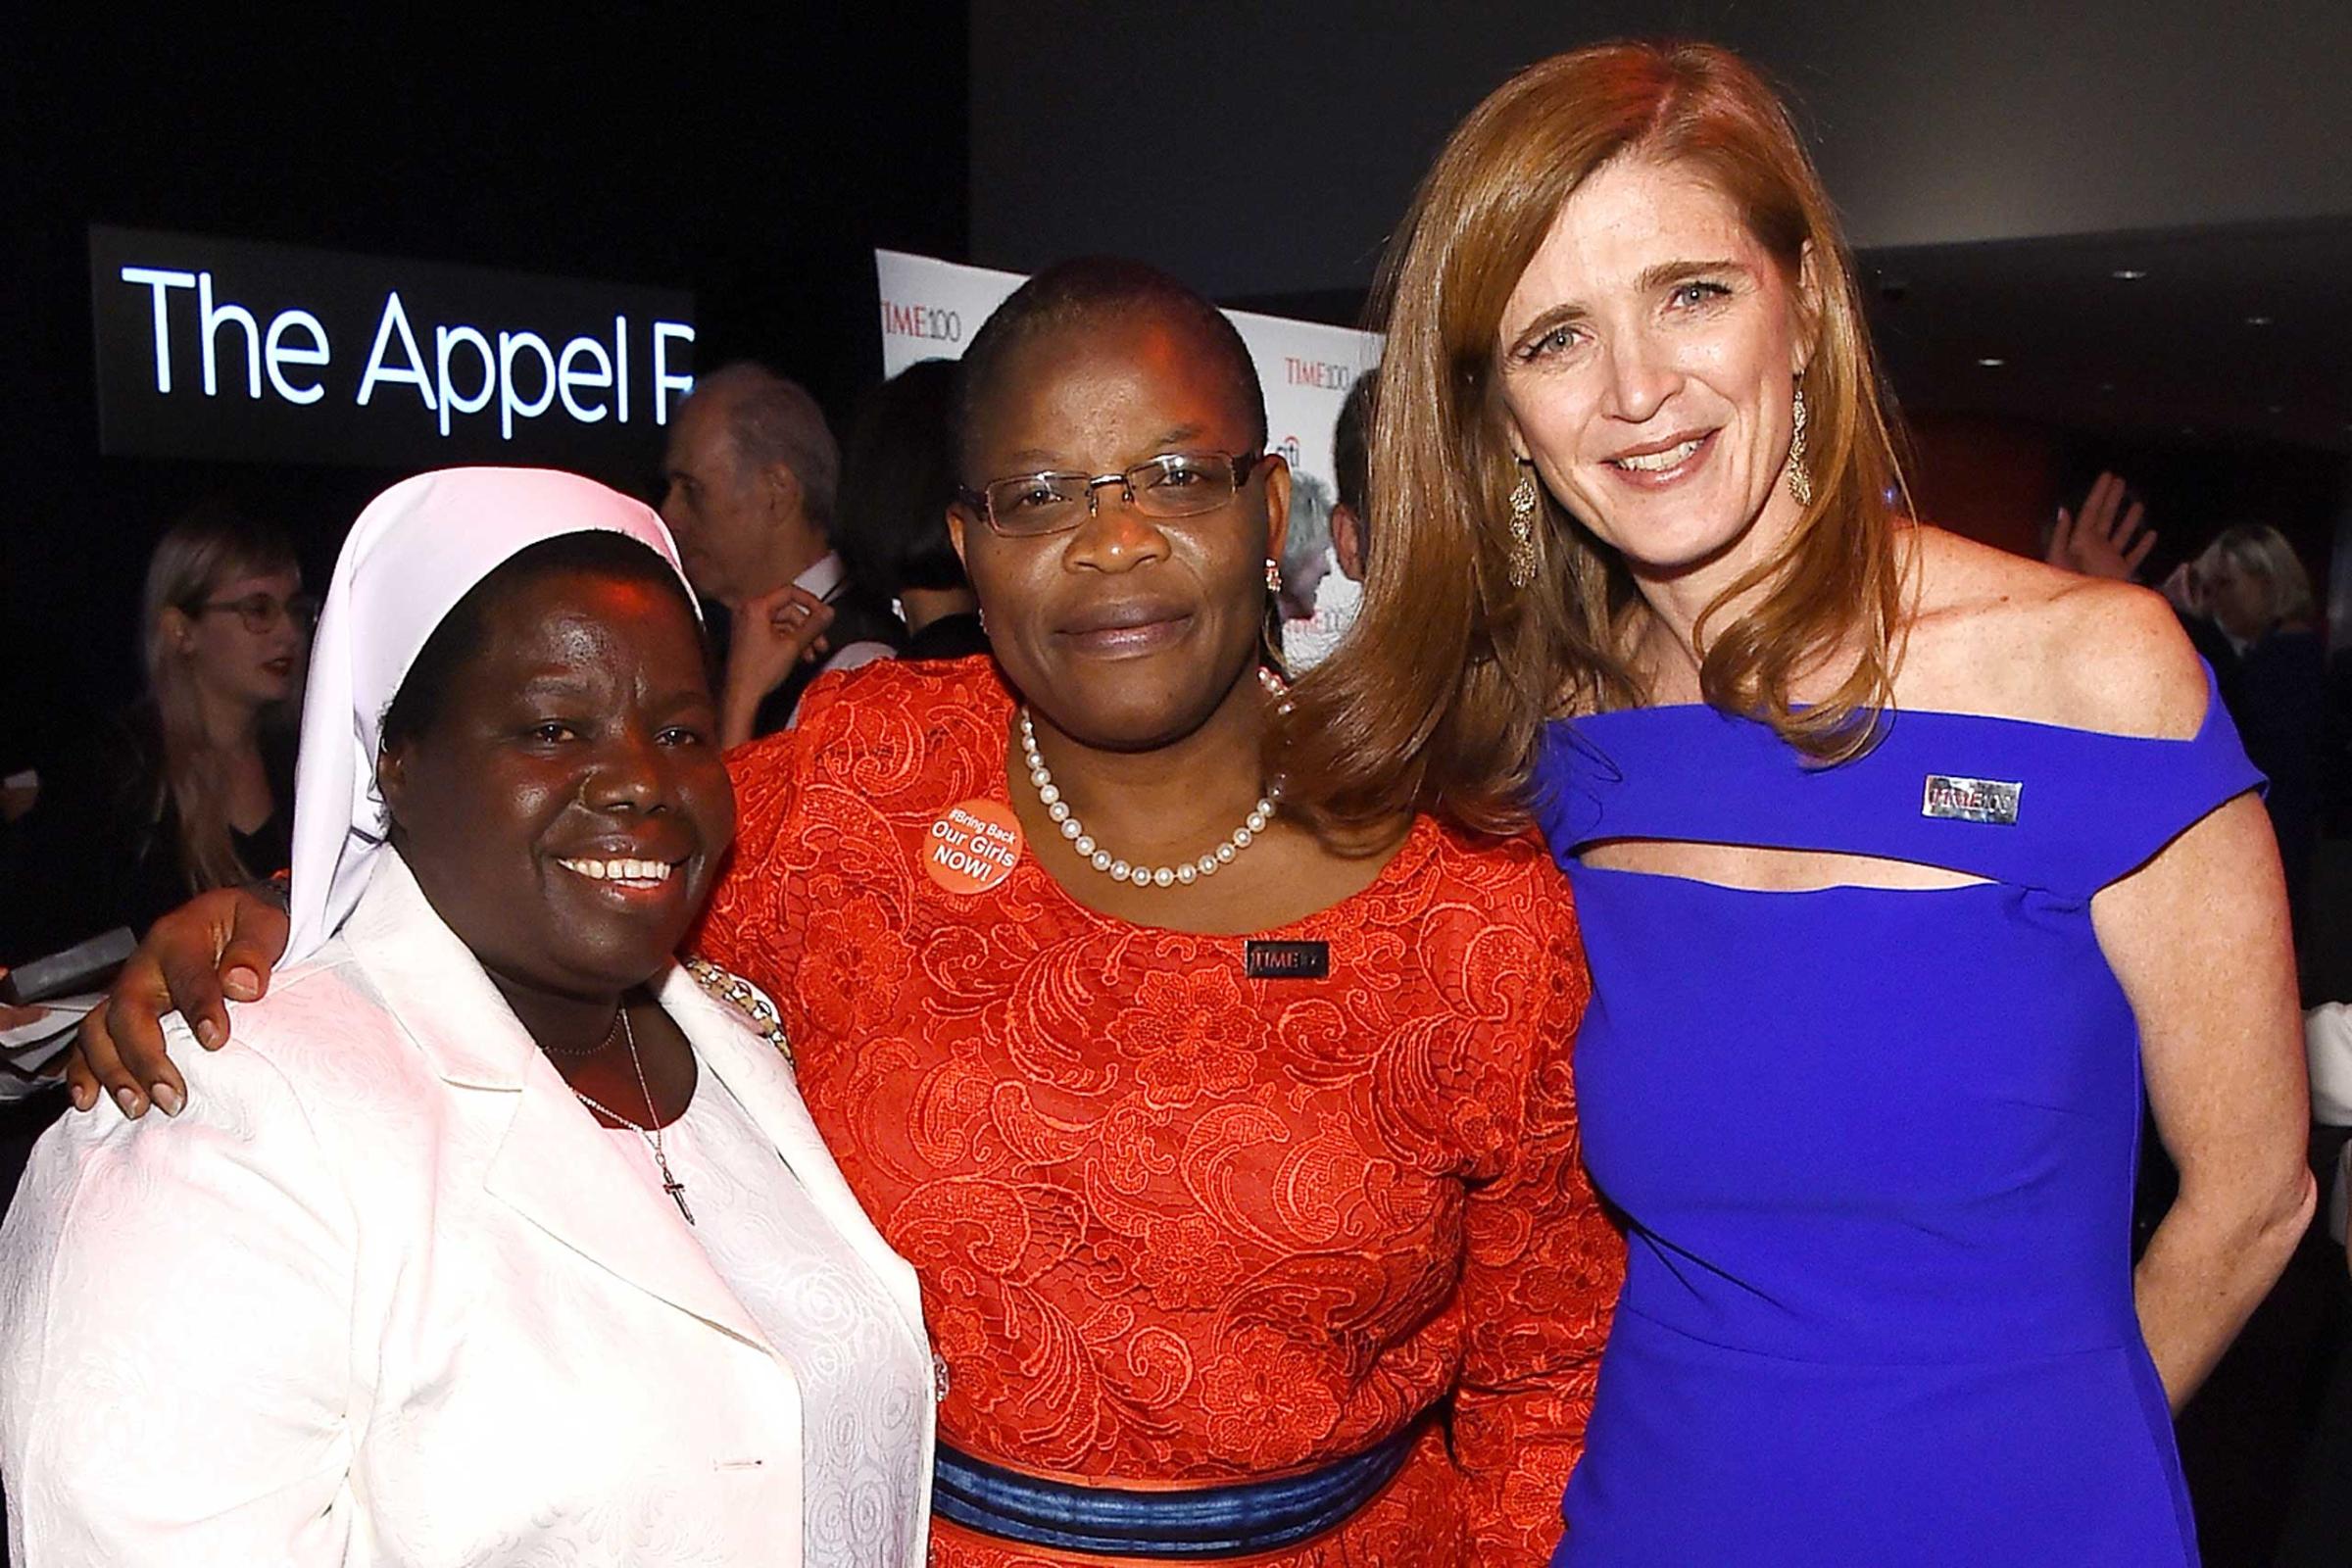 Past Time 100 honoree Sister Rosemary Nyirumbe of Saint Monica Girls Tailoring Centre, Obiageli Ezekwesili and Samantha Power attend the TIME 100 Gala at Jazz at Lincoln Center on April 21, 2015 in New York City.